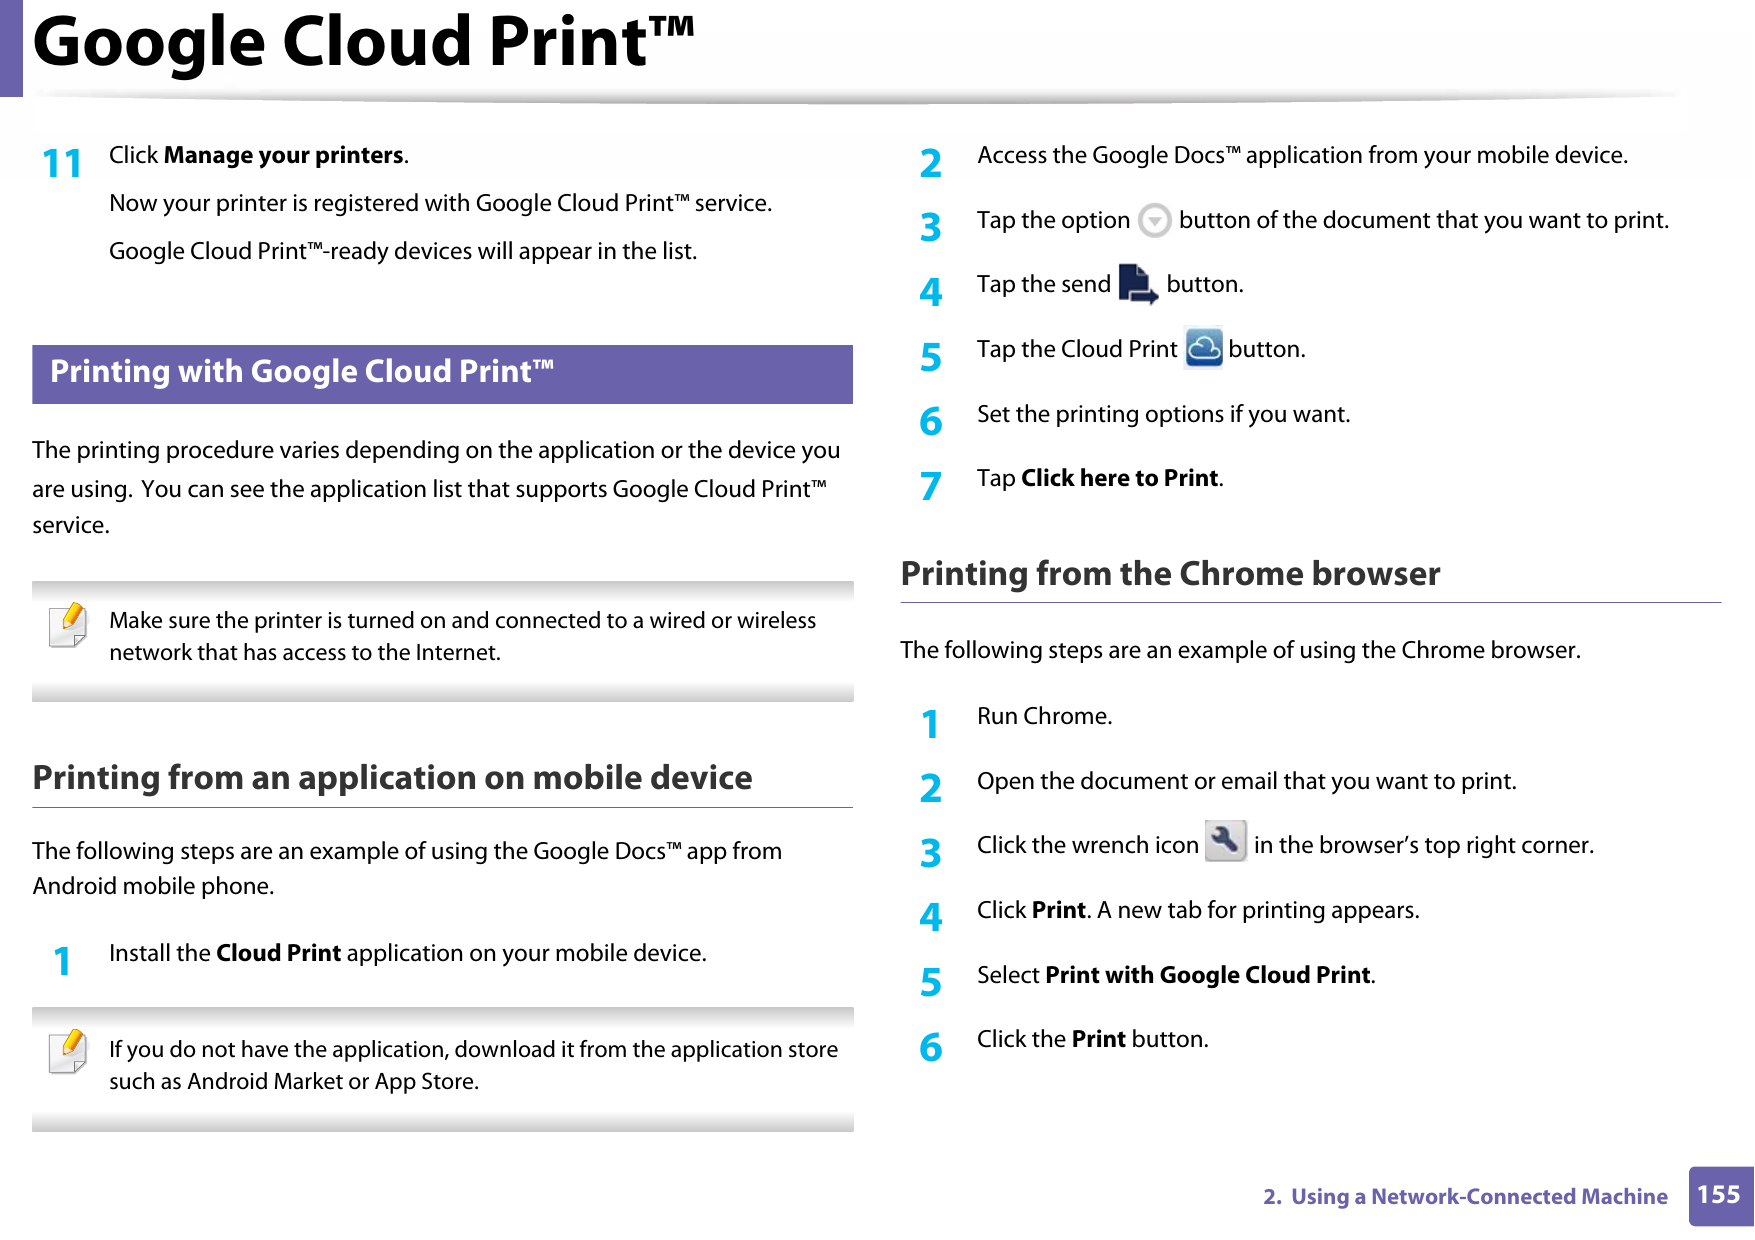 Google Cloud Print™1552.  Using a Network-Connected Machine11  Click Manage your printers.Now your printer is registered with Google Cloud Print™ service.Google Cloud Print™-ready devices will appear in the list.37 Printing with Google Cloud Print™The printing procedure varies depending on the application or the device you are using. You can see the application list that supports Google Cloud Print™ service. Make sure the printer is turned on and connected to a wired or wireless network that has access to the Internet. Printing from an application on mobile deviceThe following steps are an example of using the Google Docs™ app from Android mobile phone.1Install the Cloud Print application on your mobile device. If you do not have the application, download it from the application store such as Android Market or App Store. 2  Access the Google Docs™ application from your mobile device.3  Tap the option   button of the document that you want to print.4  Tap the send   button.5  Tap the Cloud Print   button.6  Set the printing options if you want.7  Tap Click here to Print.Printing from the Chrome browserThe following steps are an example of using the Chrome browser.1Run Chrome.2  Open the document or email that you want to print.3  Click the wrench icon   in the browser’s top right corner.4  Click Print. A new tab for printing appears.5  Select Print with Google Cloud Print.6  Click the Print button.